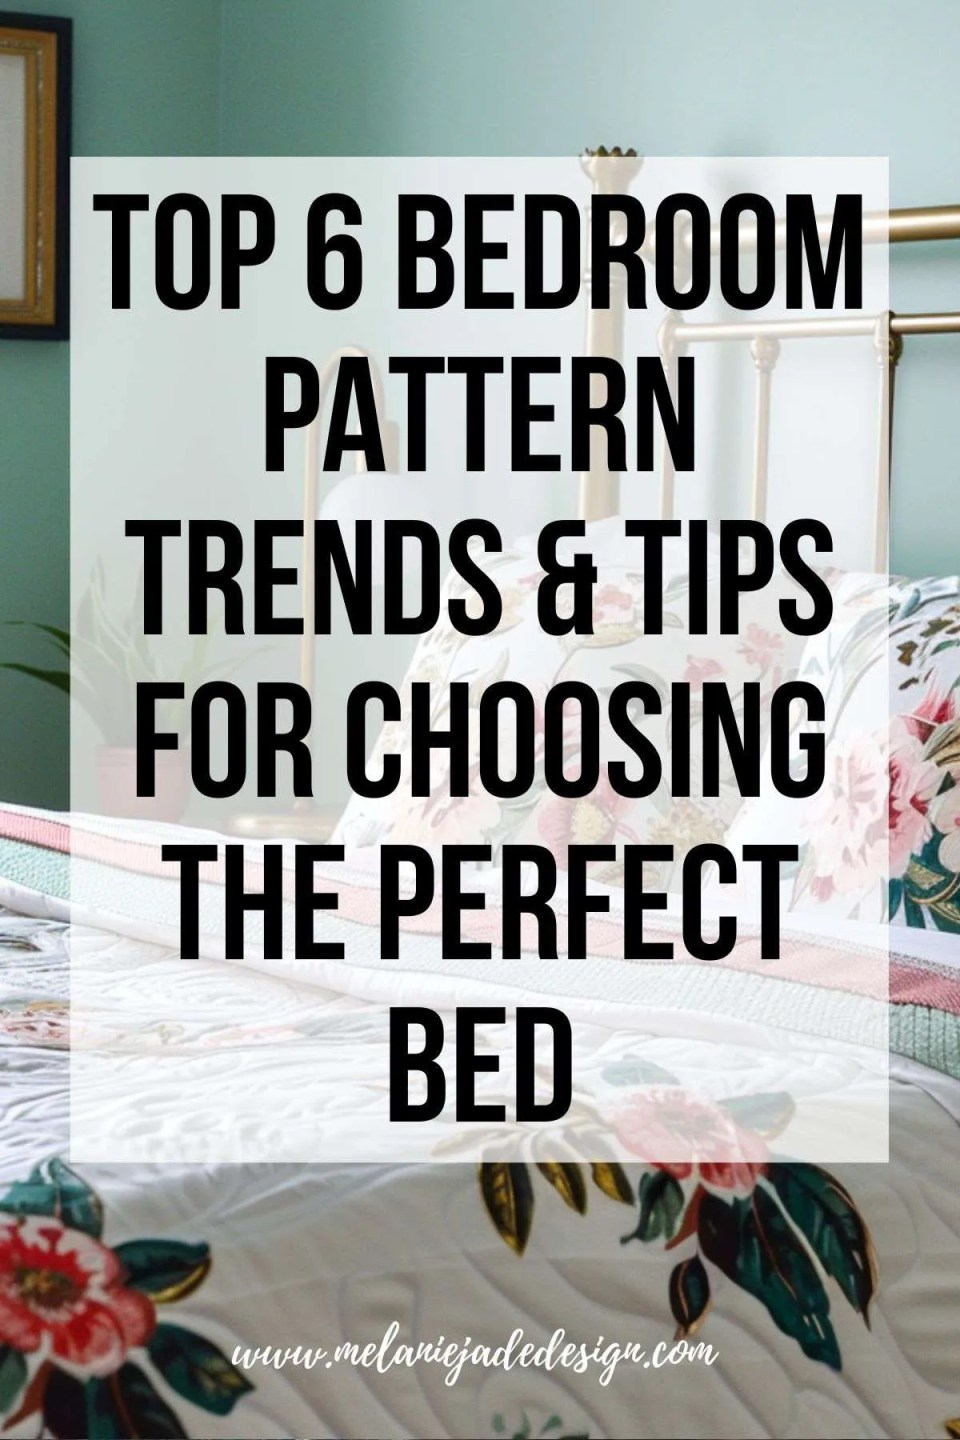 Top 6 Bedroom Pattern Trends and Tips for Choosing the Perfect Bed pinterest pin